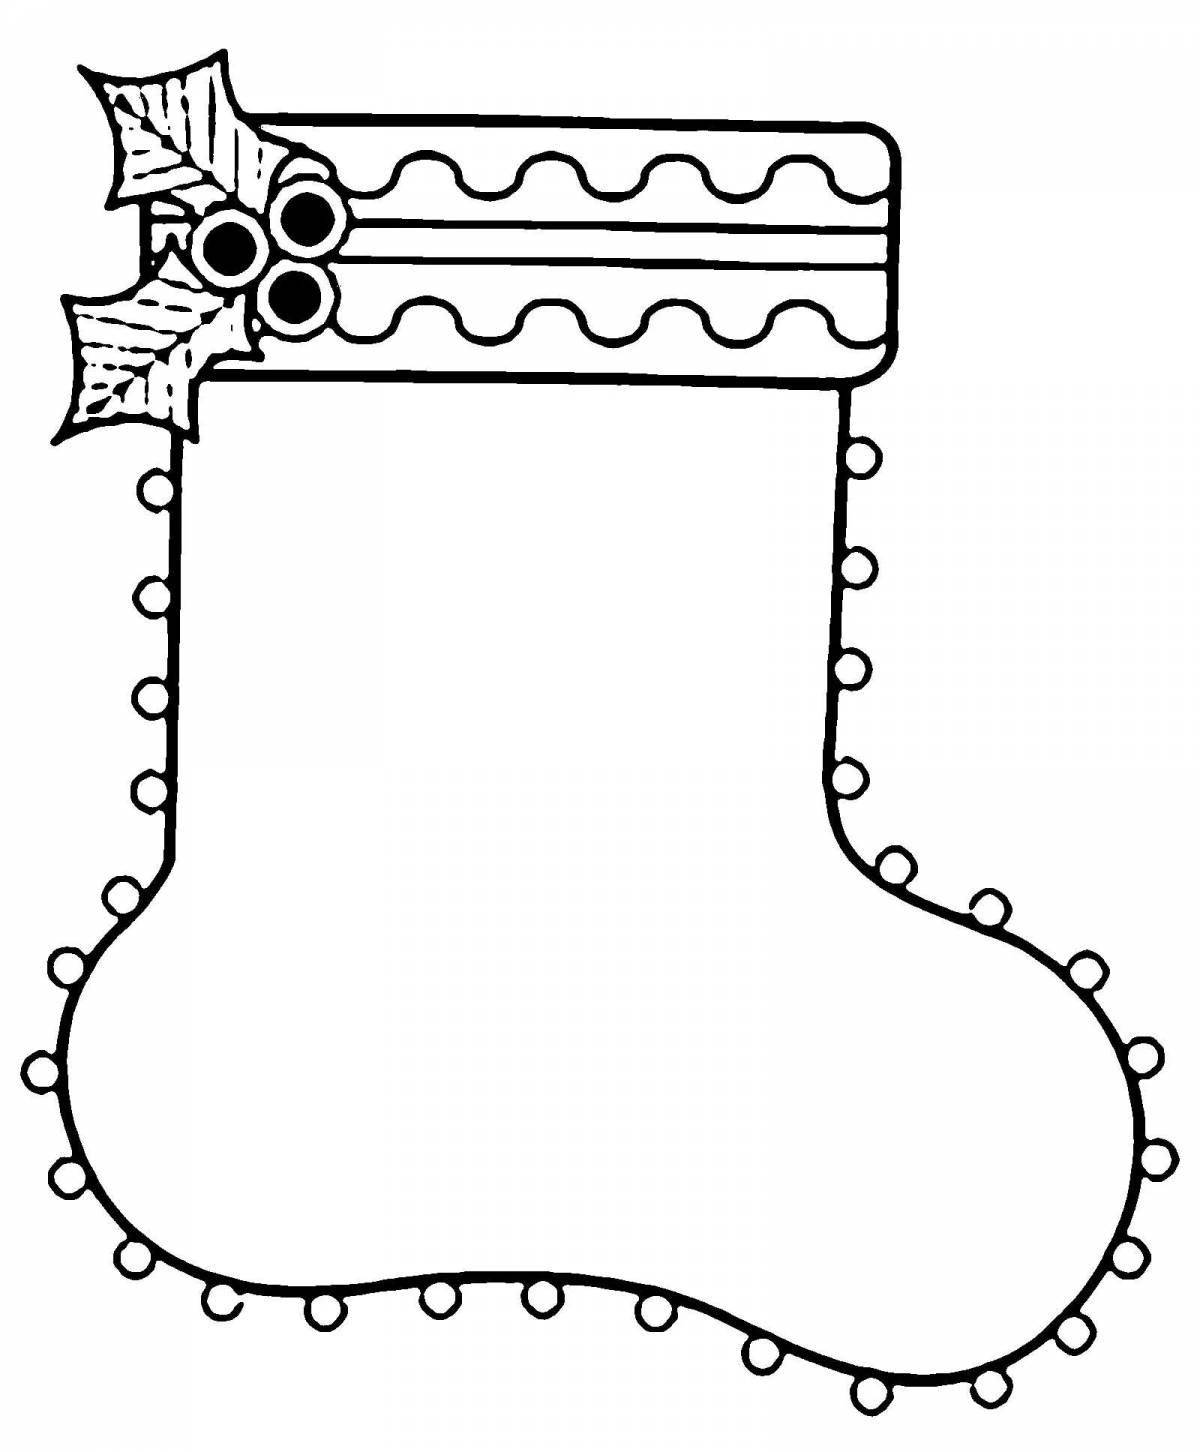 Exciting coloring page with shoes pattern